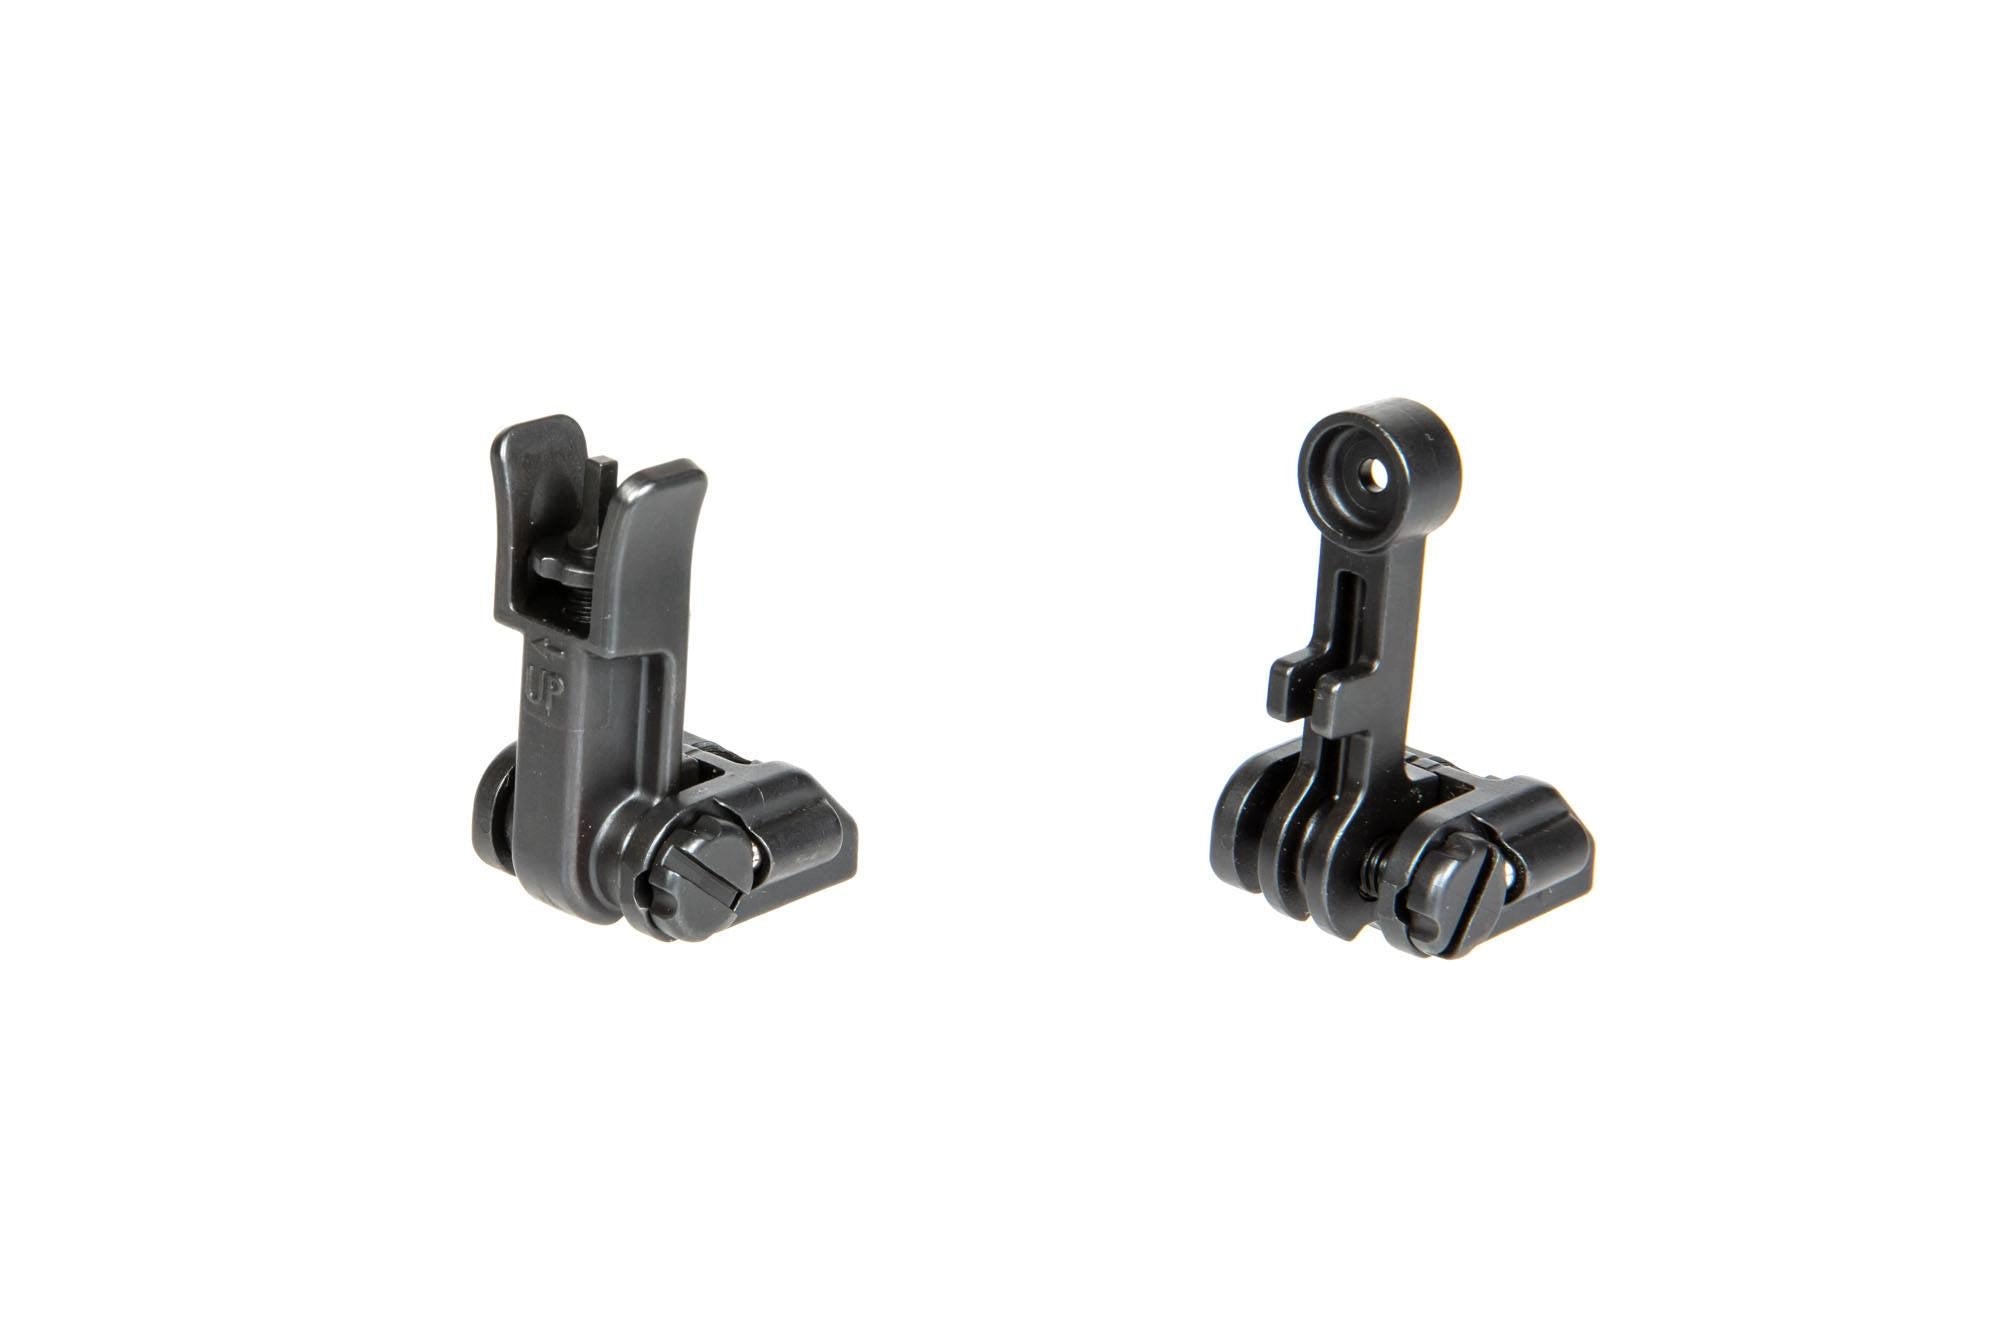 Set of spare Griffin Armament Modular BUIS sights-1